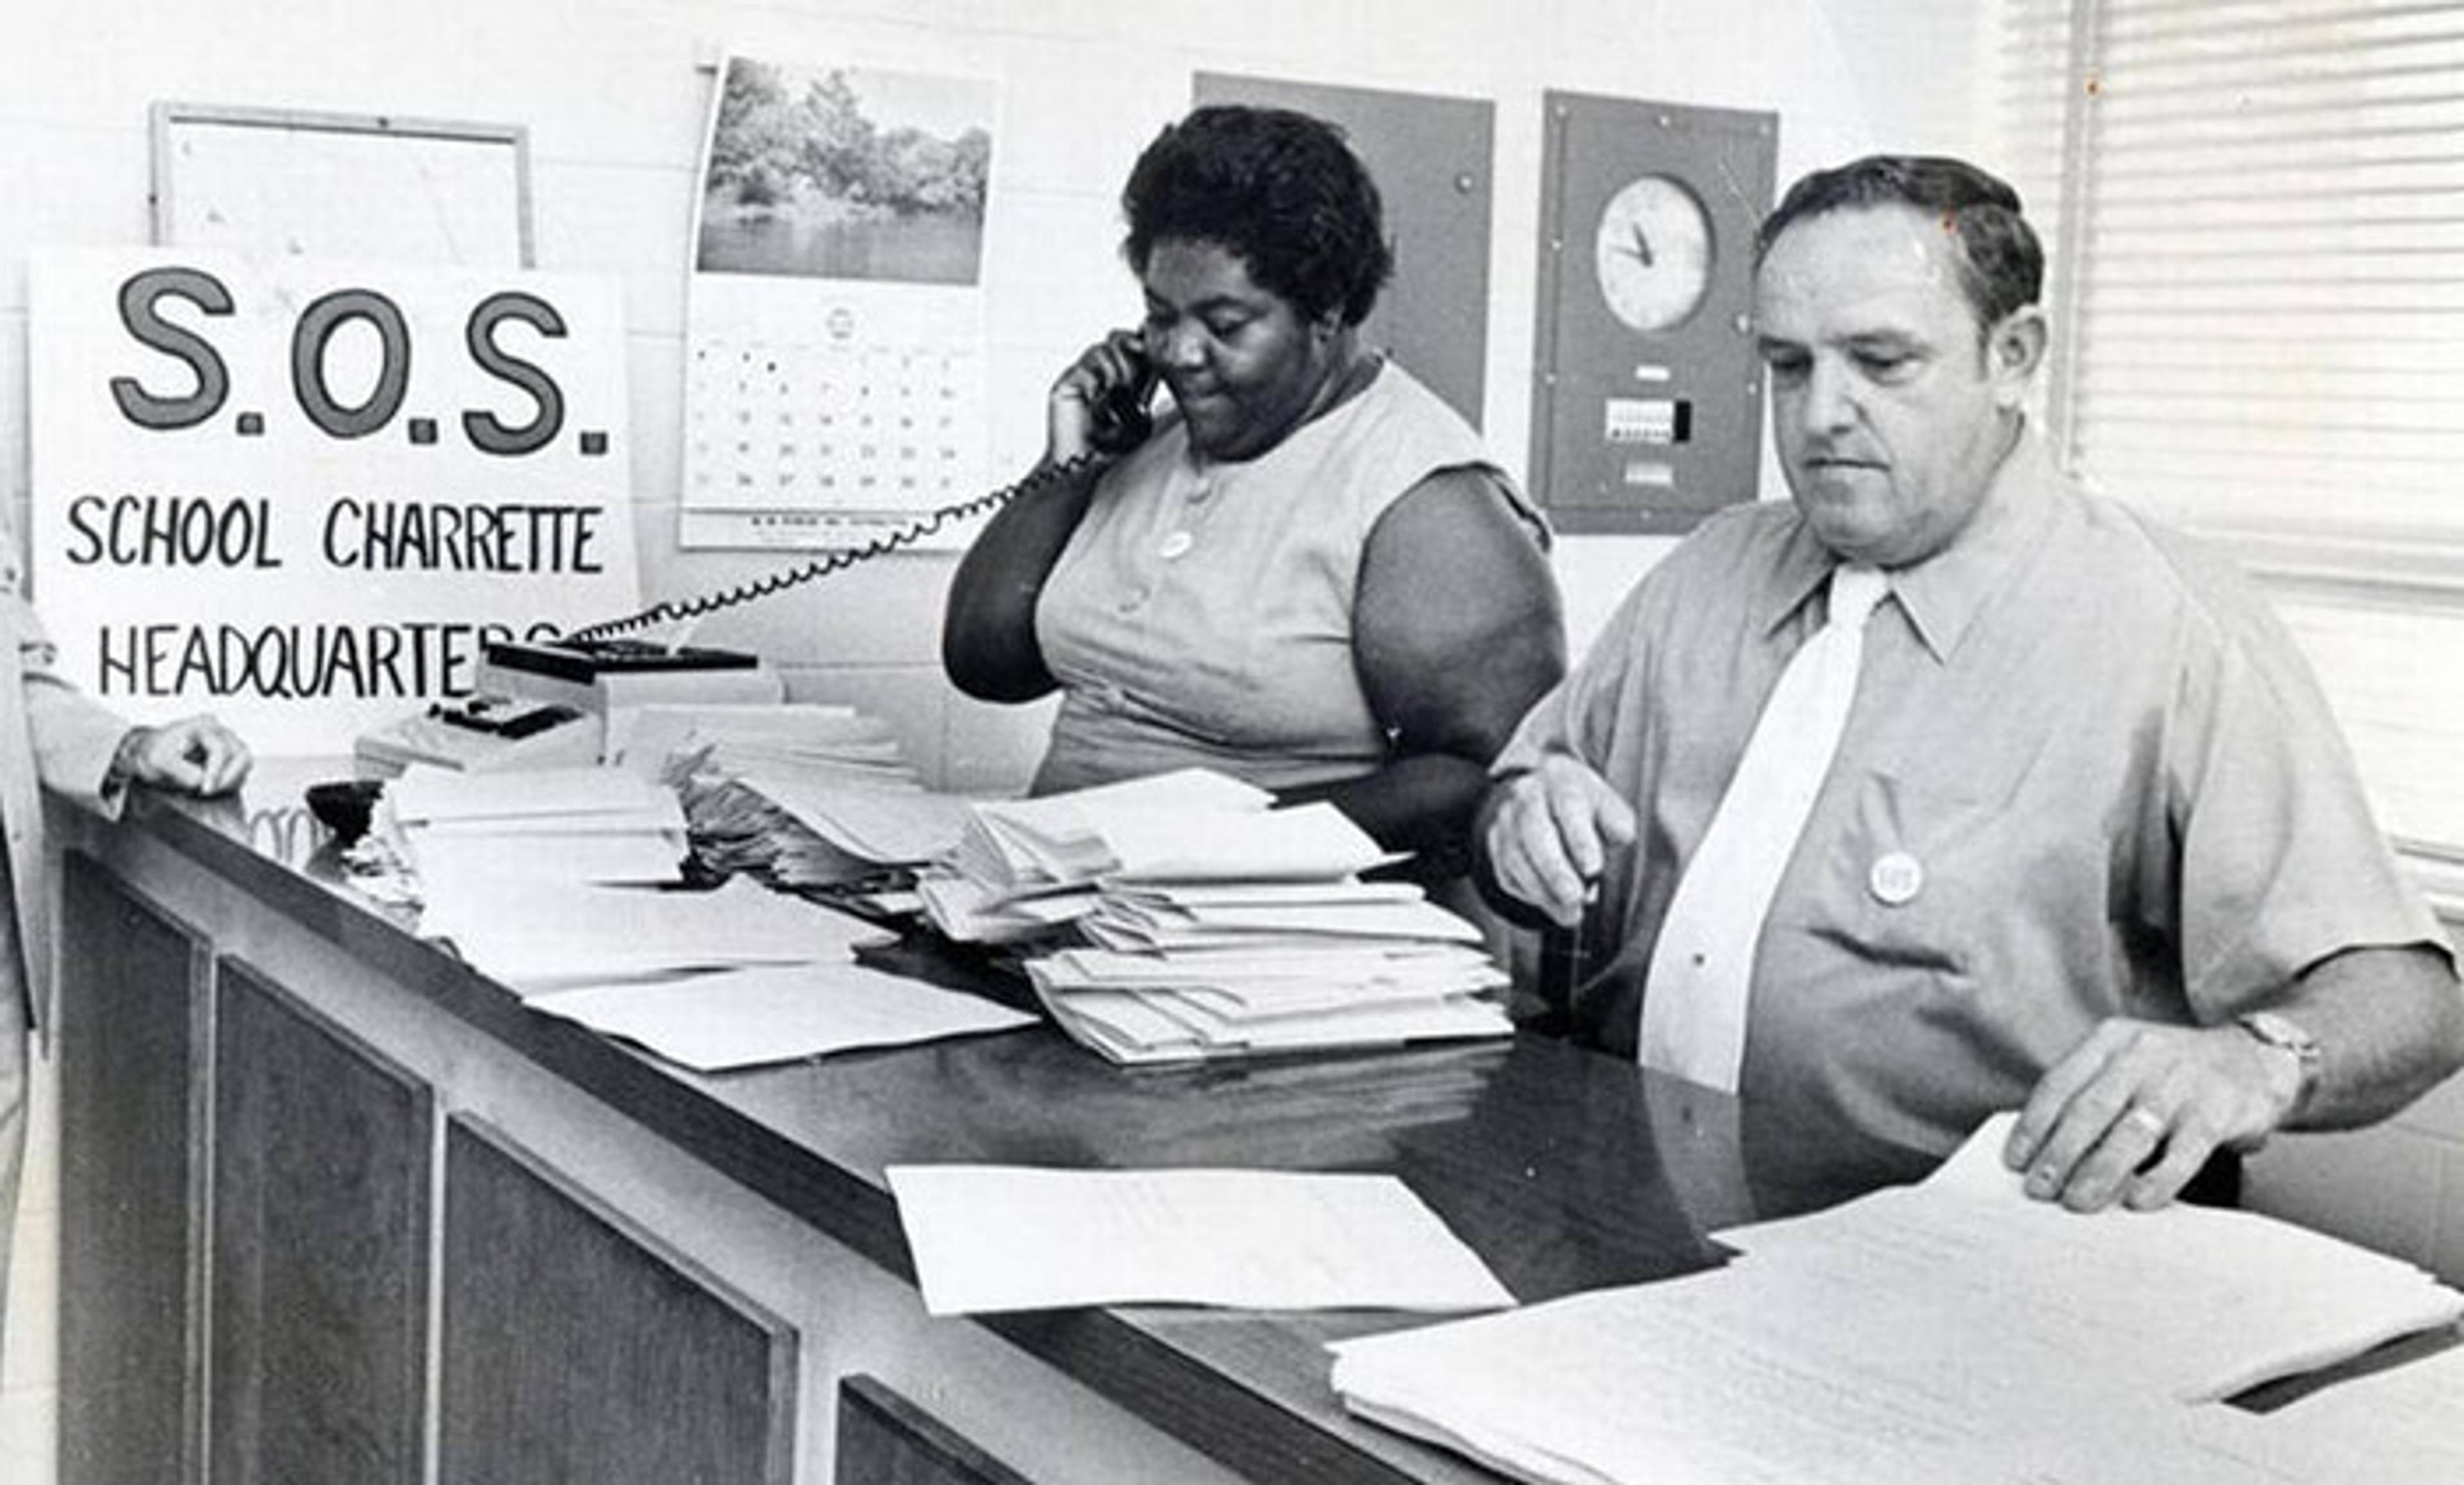 <p>Ann Atwater and C P Ellis, longtime enemies, chaired a 10-day community summit on desegregating Durham schools<em>, </em>‘Save Our Schools’ (SOS). <em>Photo by Jim Thornton, courtesy of The Herald-Sun Collection, University of North Carolina at Chapel Hill Libraries</em></p>